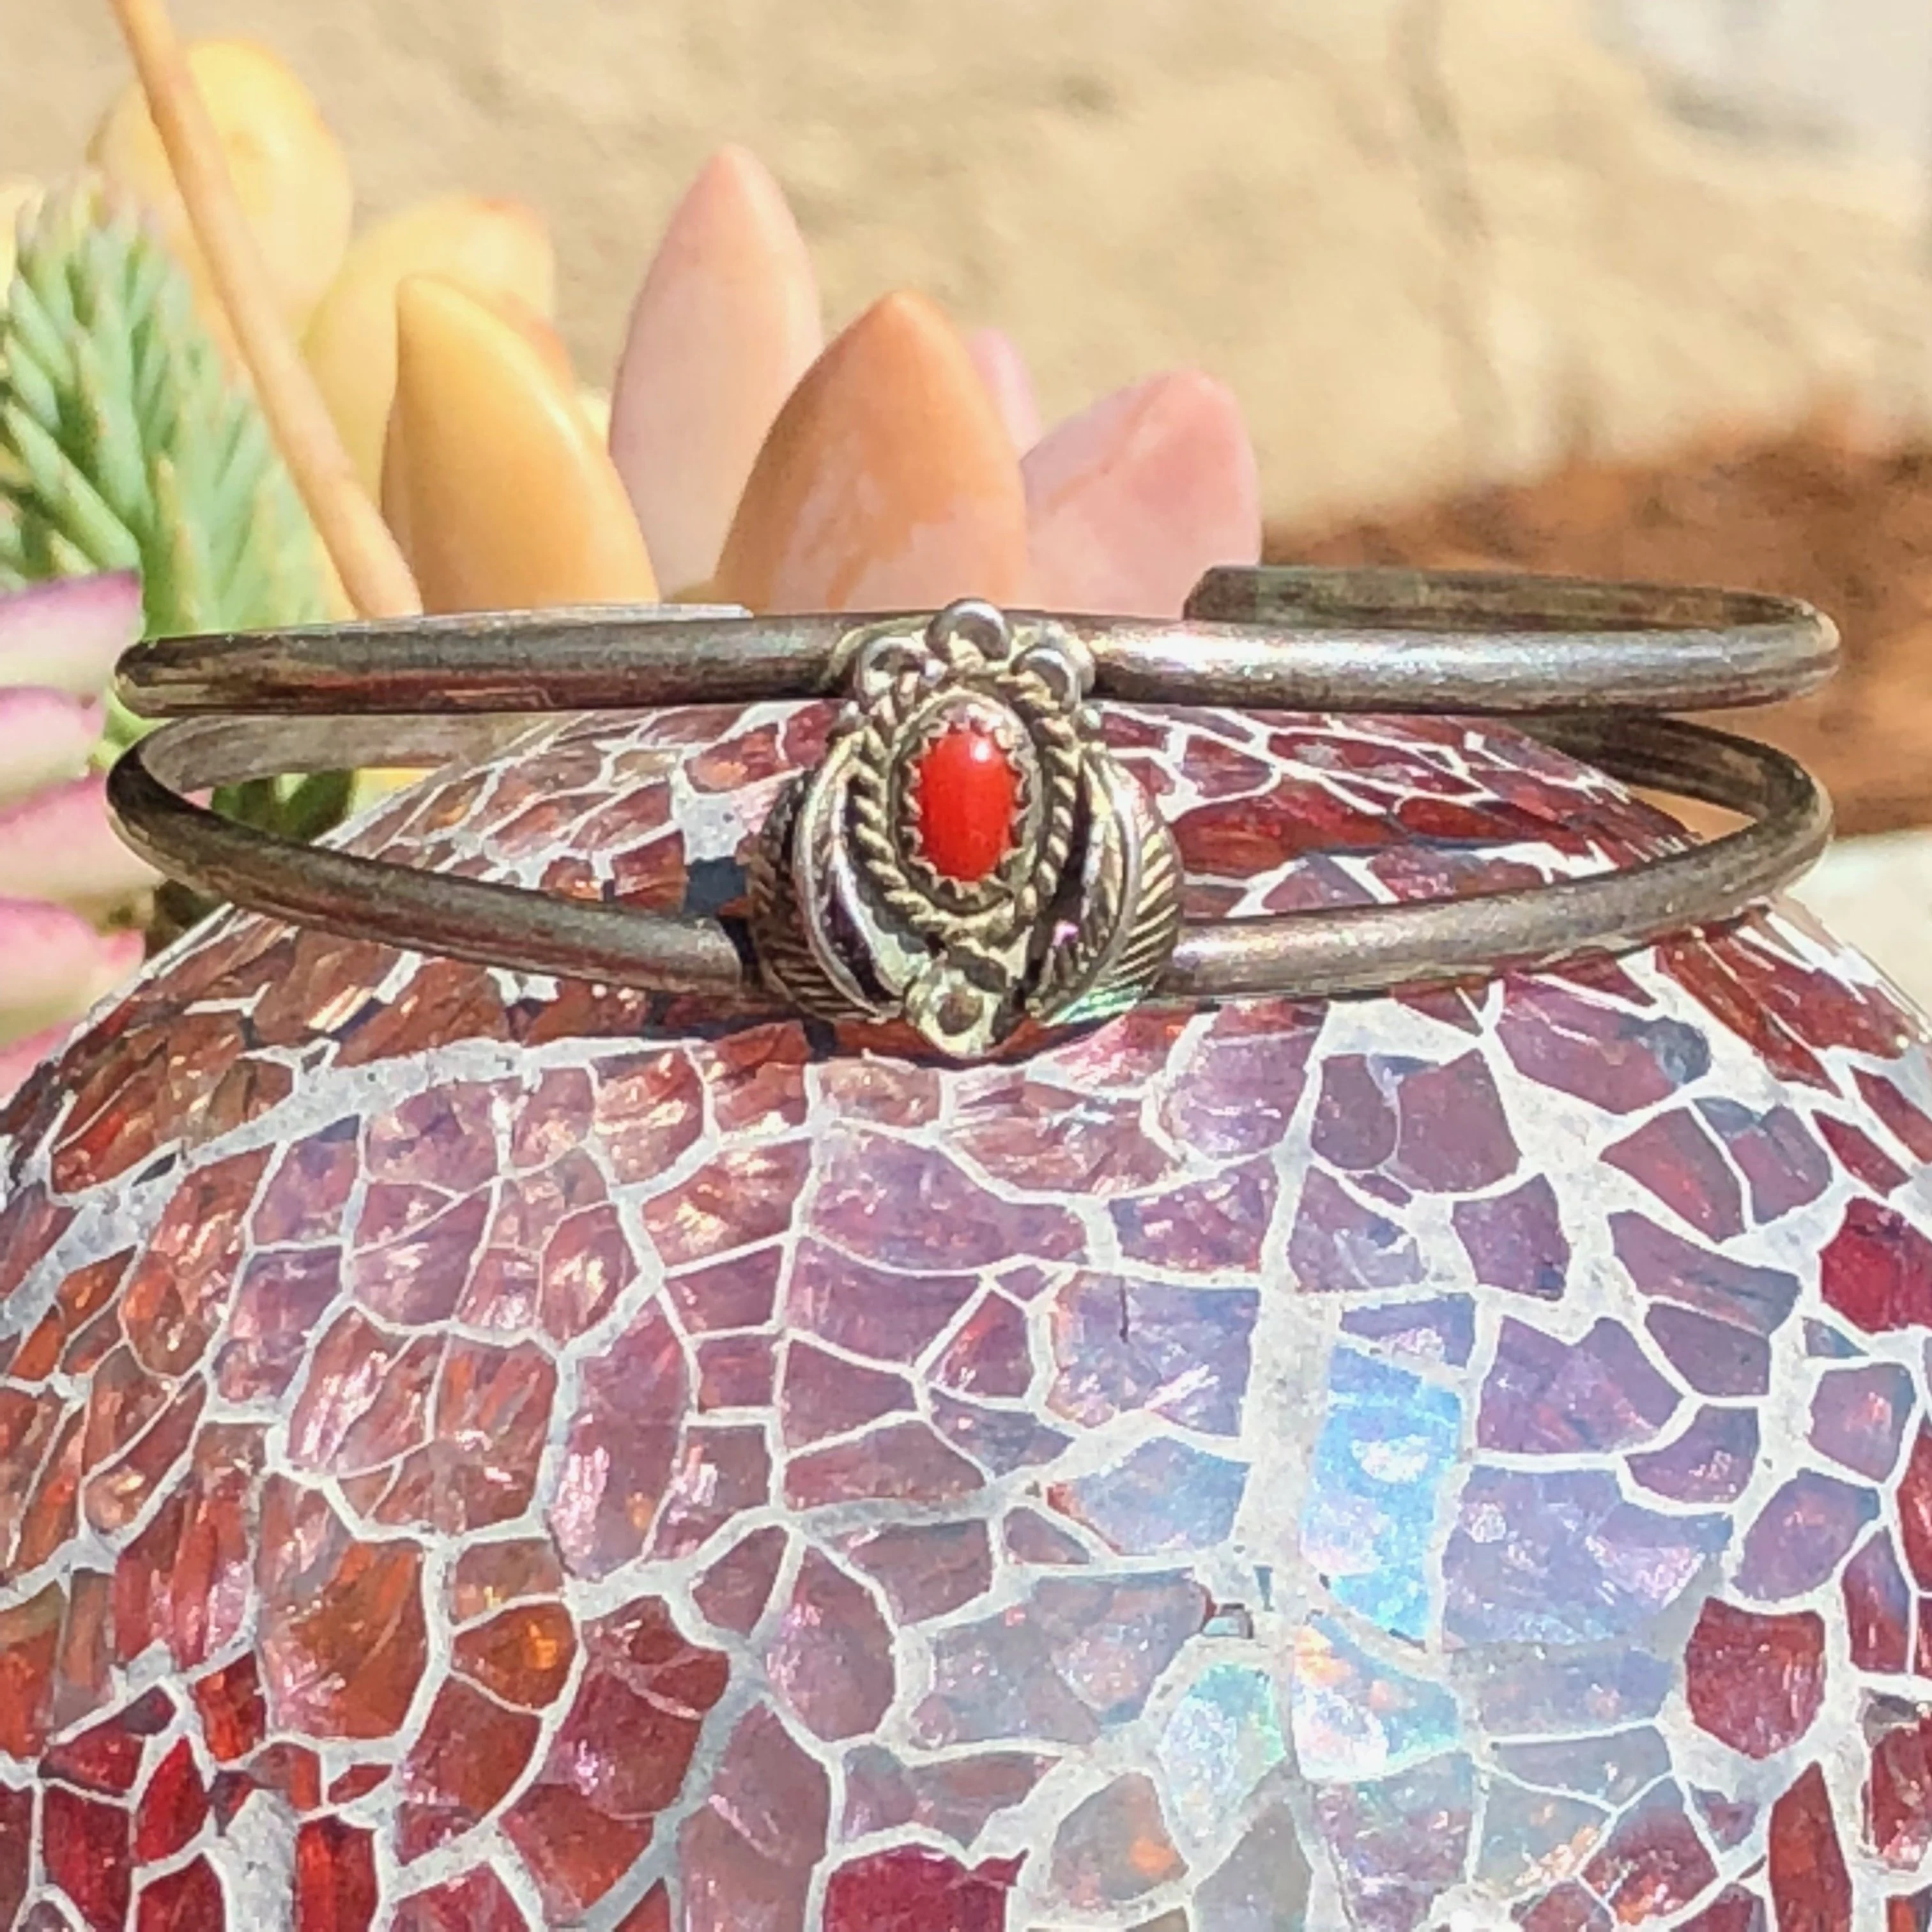 Southwestern Pulled Sterling Silver Wire Cuff Bracelet with Red Coral